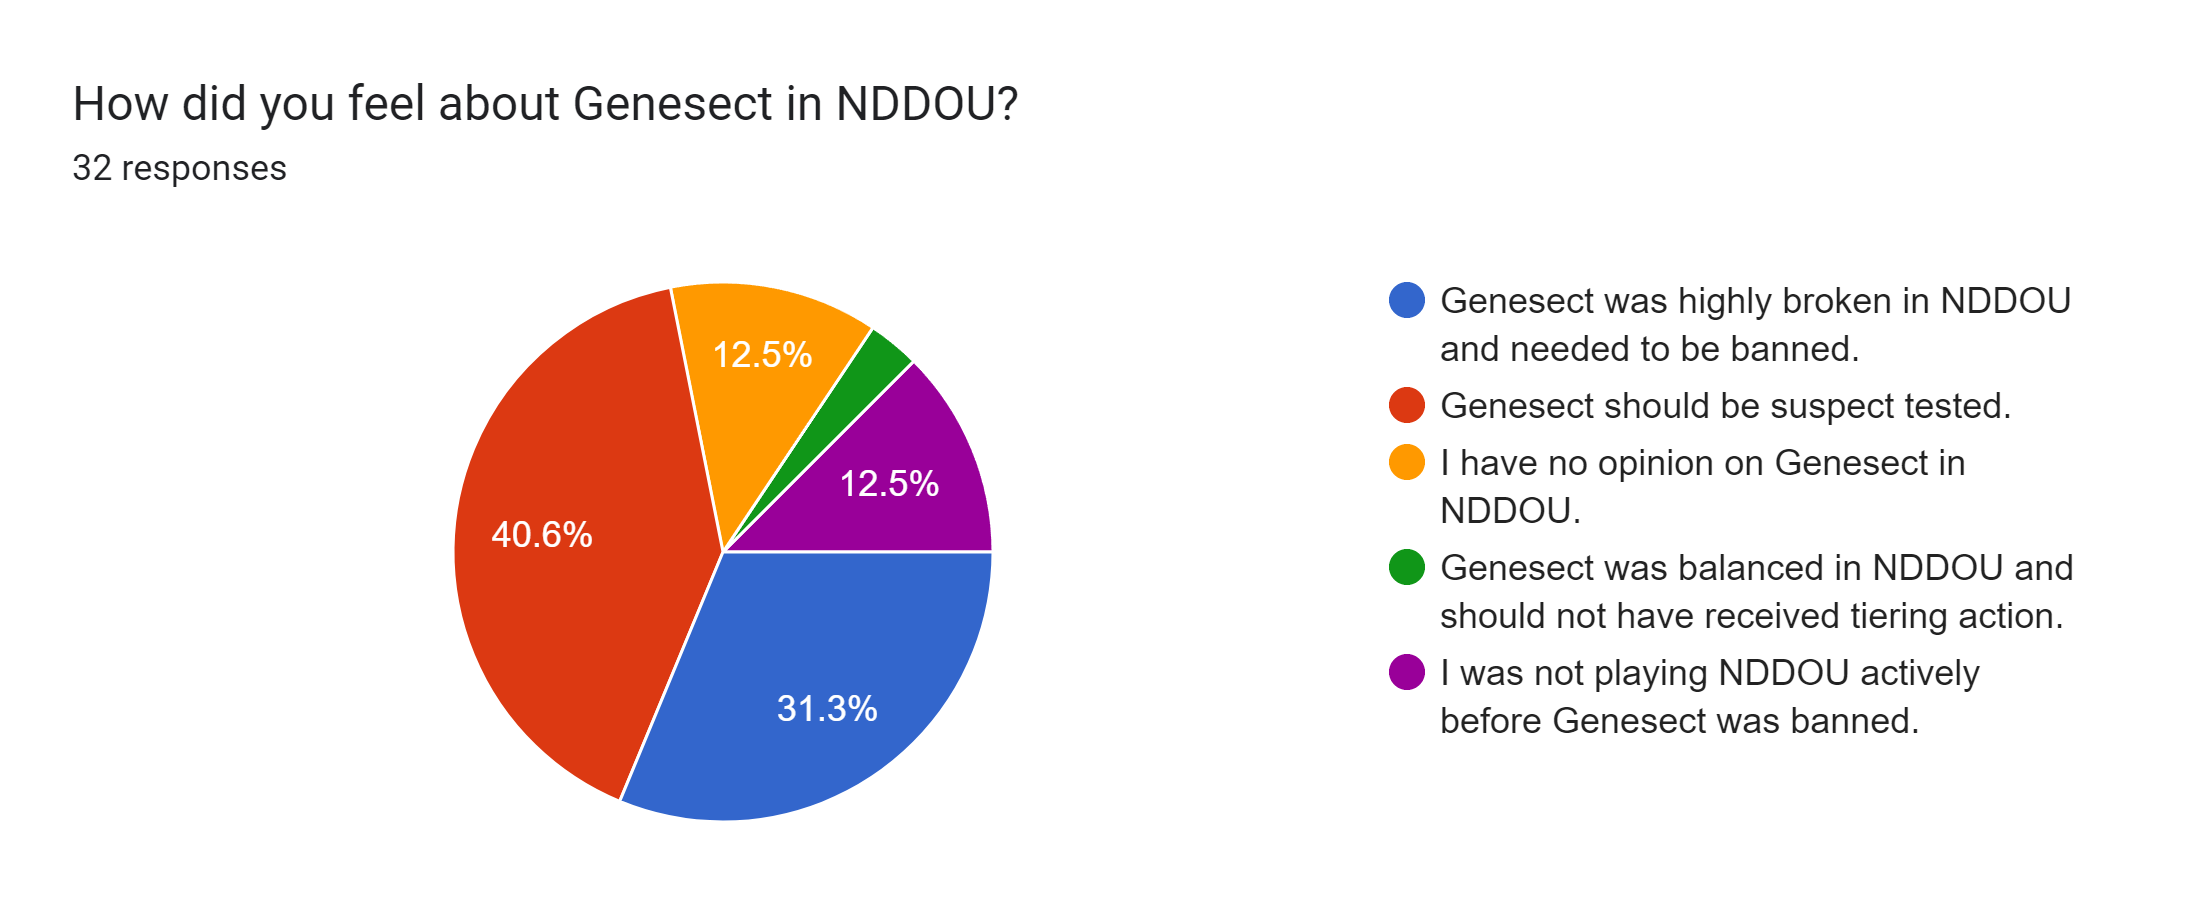 Forms response chart. Question title: How did you feel about Genesect in NDDOU?. Number of responses: 32 responses.